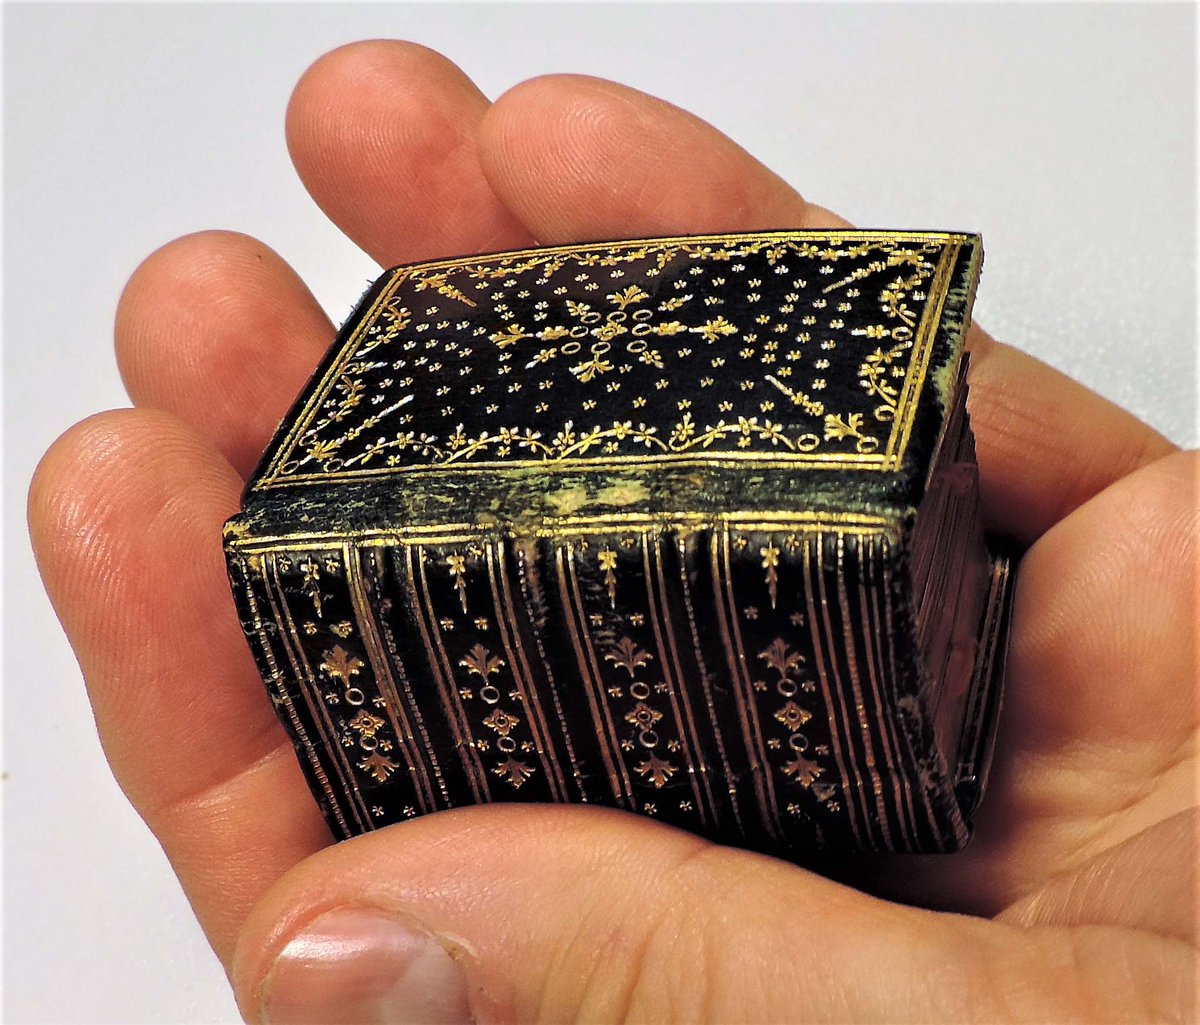 The end-stage of a miniaturization trend that had been accelerating from the 12th cent, this manuscript could only have been made after the introduction of the lens. One of the smallest extant medieval Psalters, measuring a mere 50 x 37mm and weighing just a fraction of a beaver.